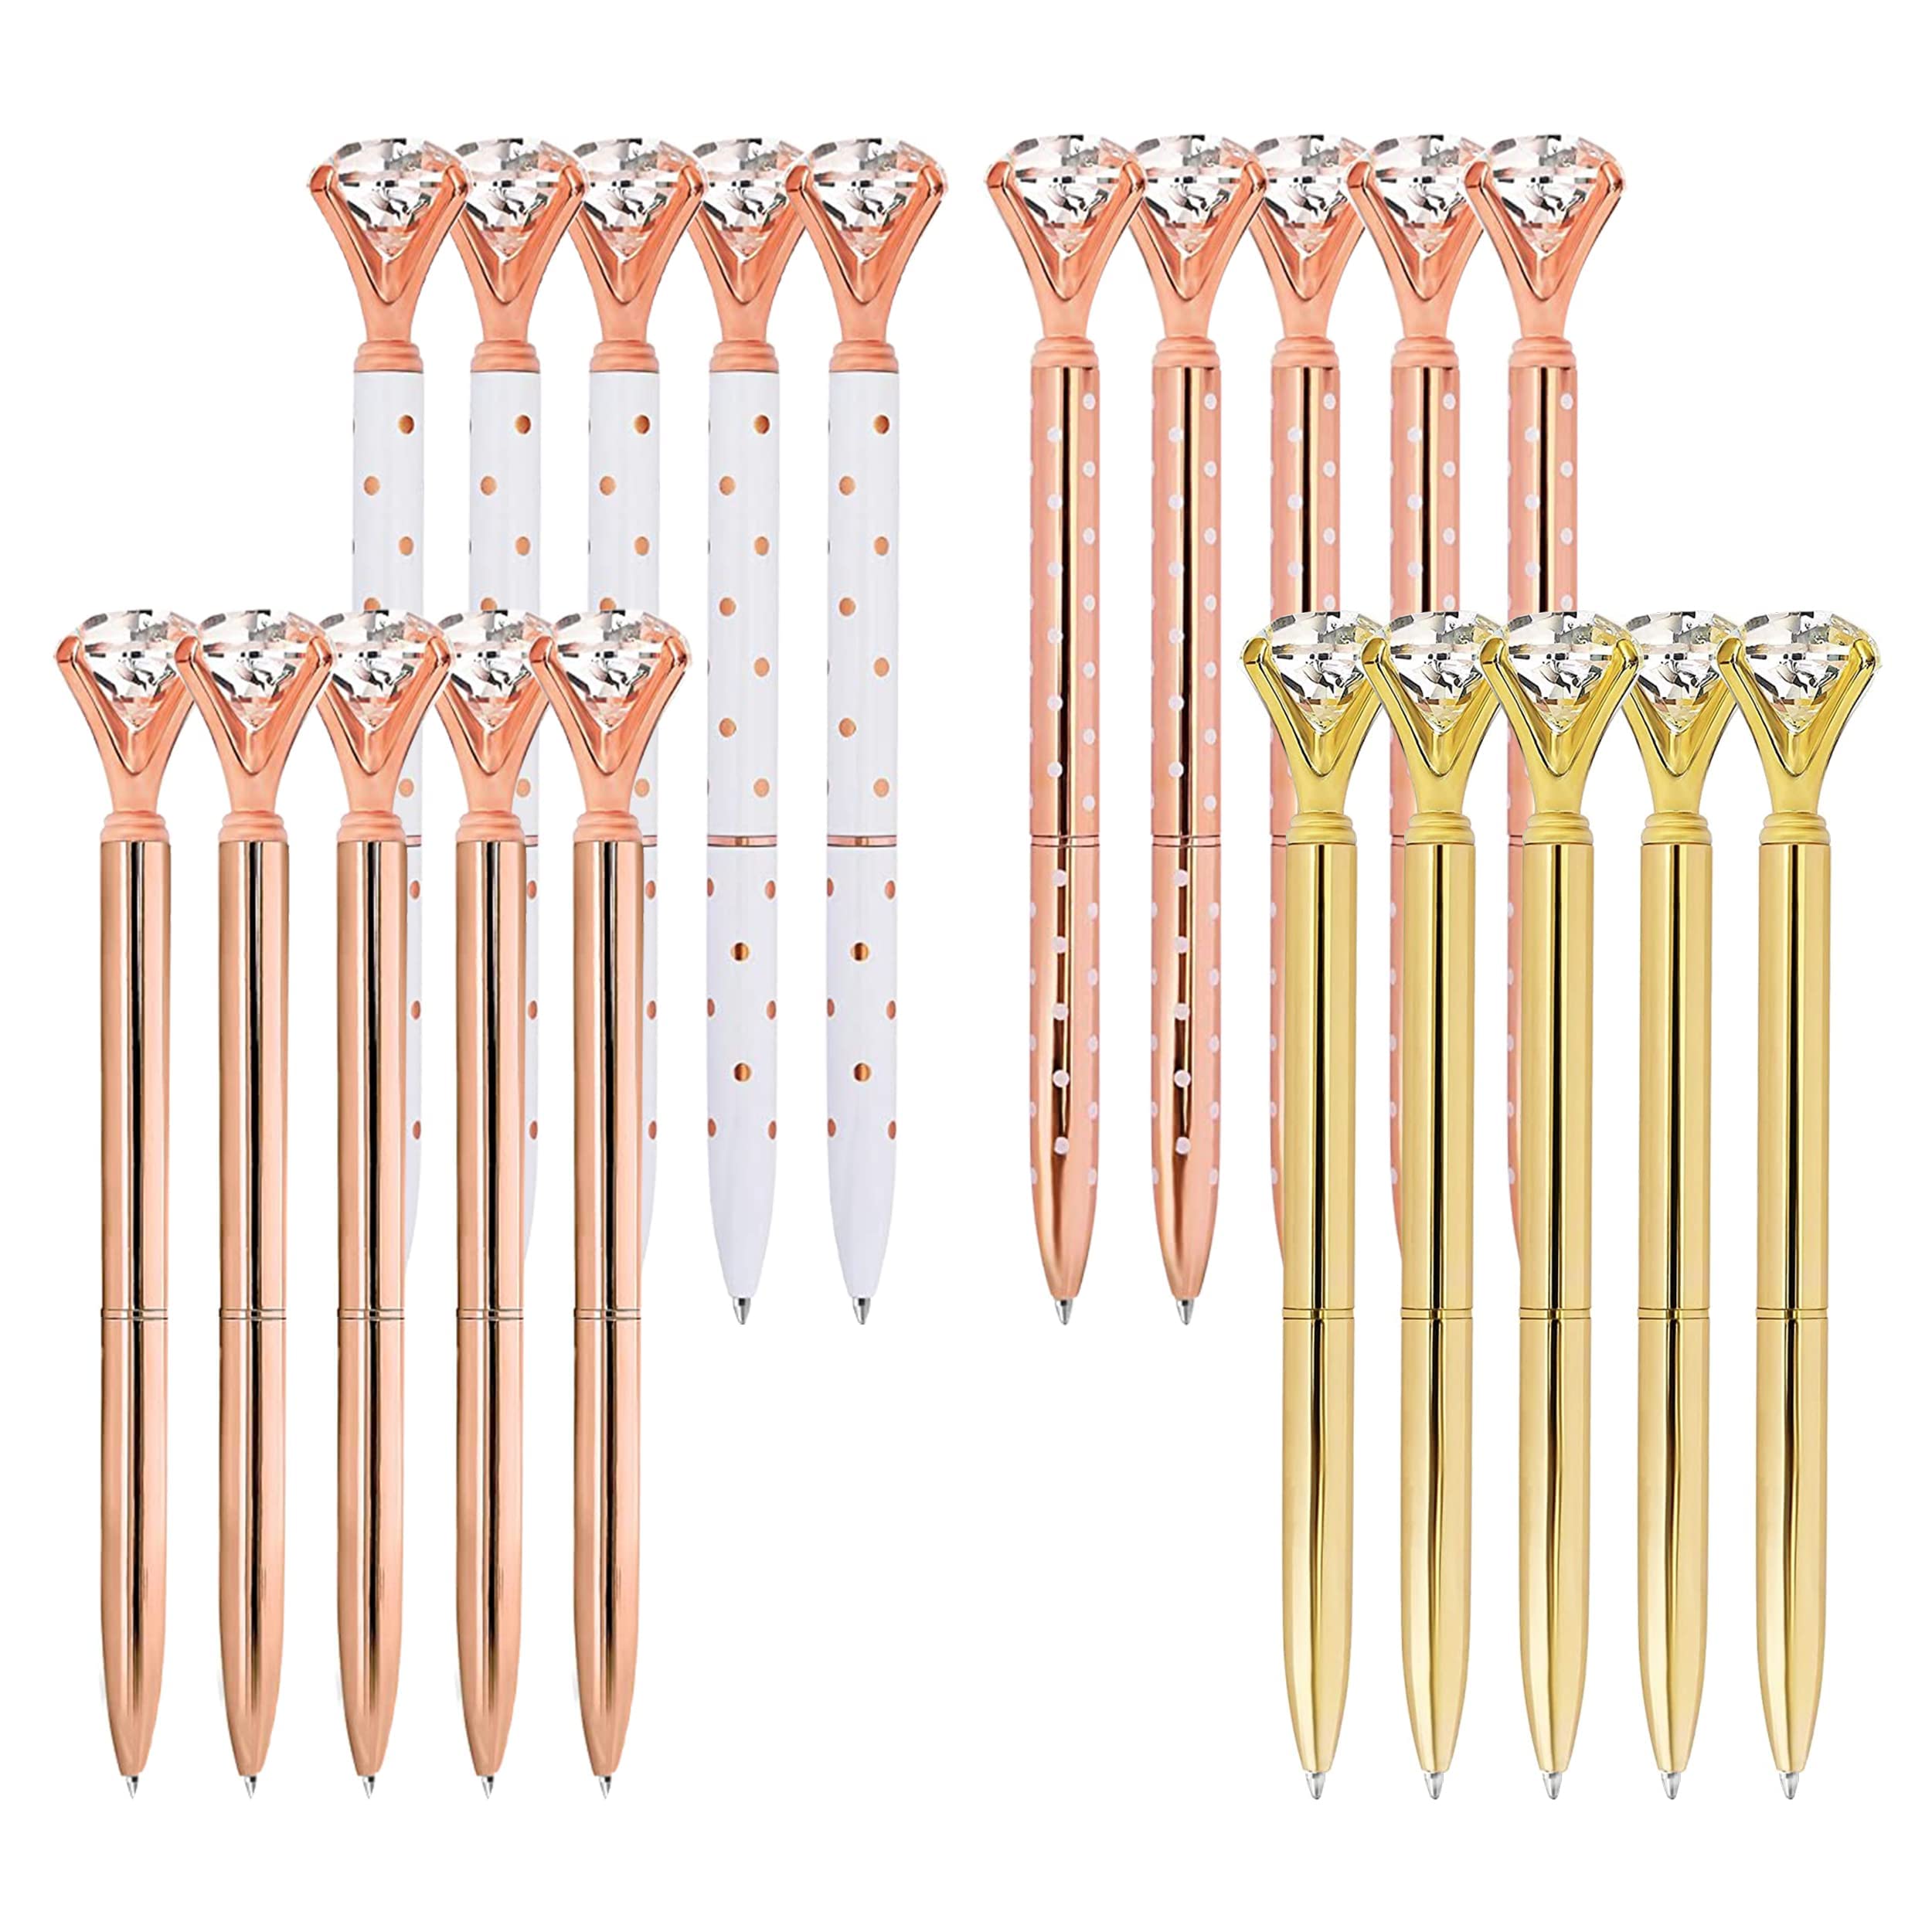 ETCBUYS Multi-Color Diamond Ballpoint Pen for Stylish Fancy Office Supplies- Pens-RGWRG 12PK